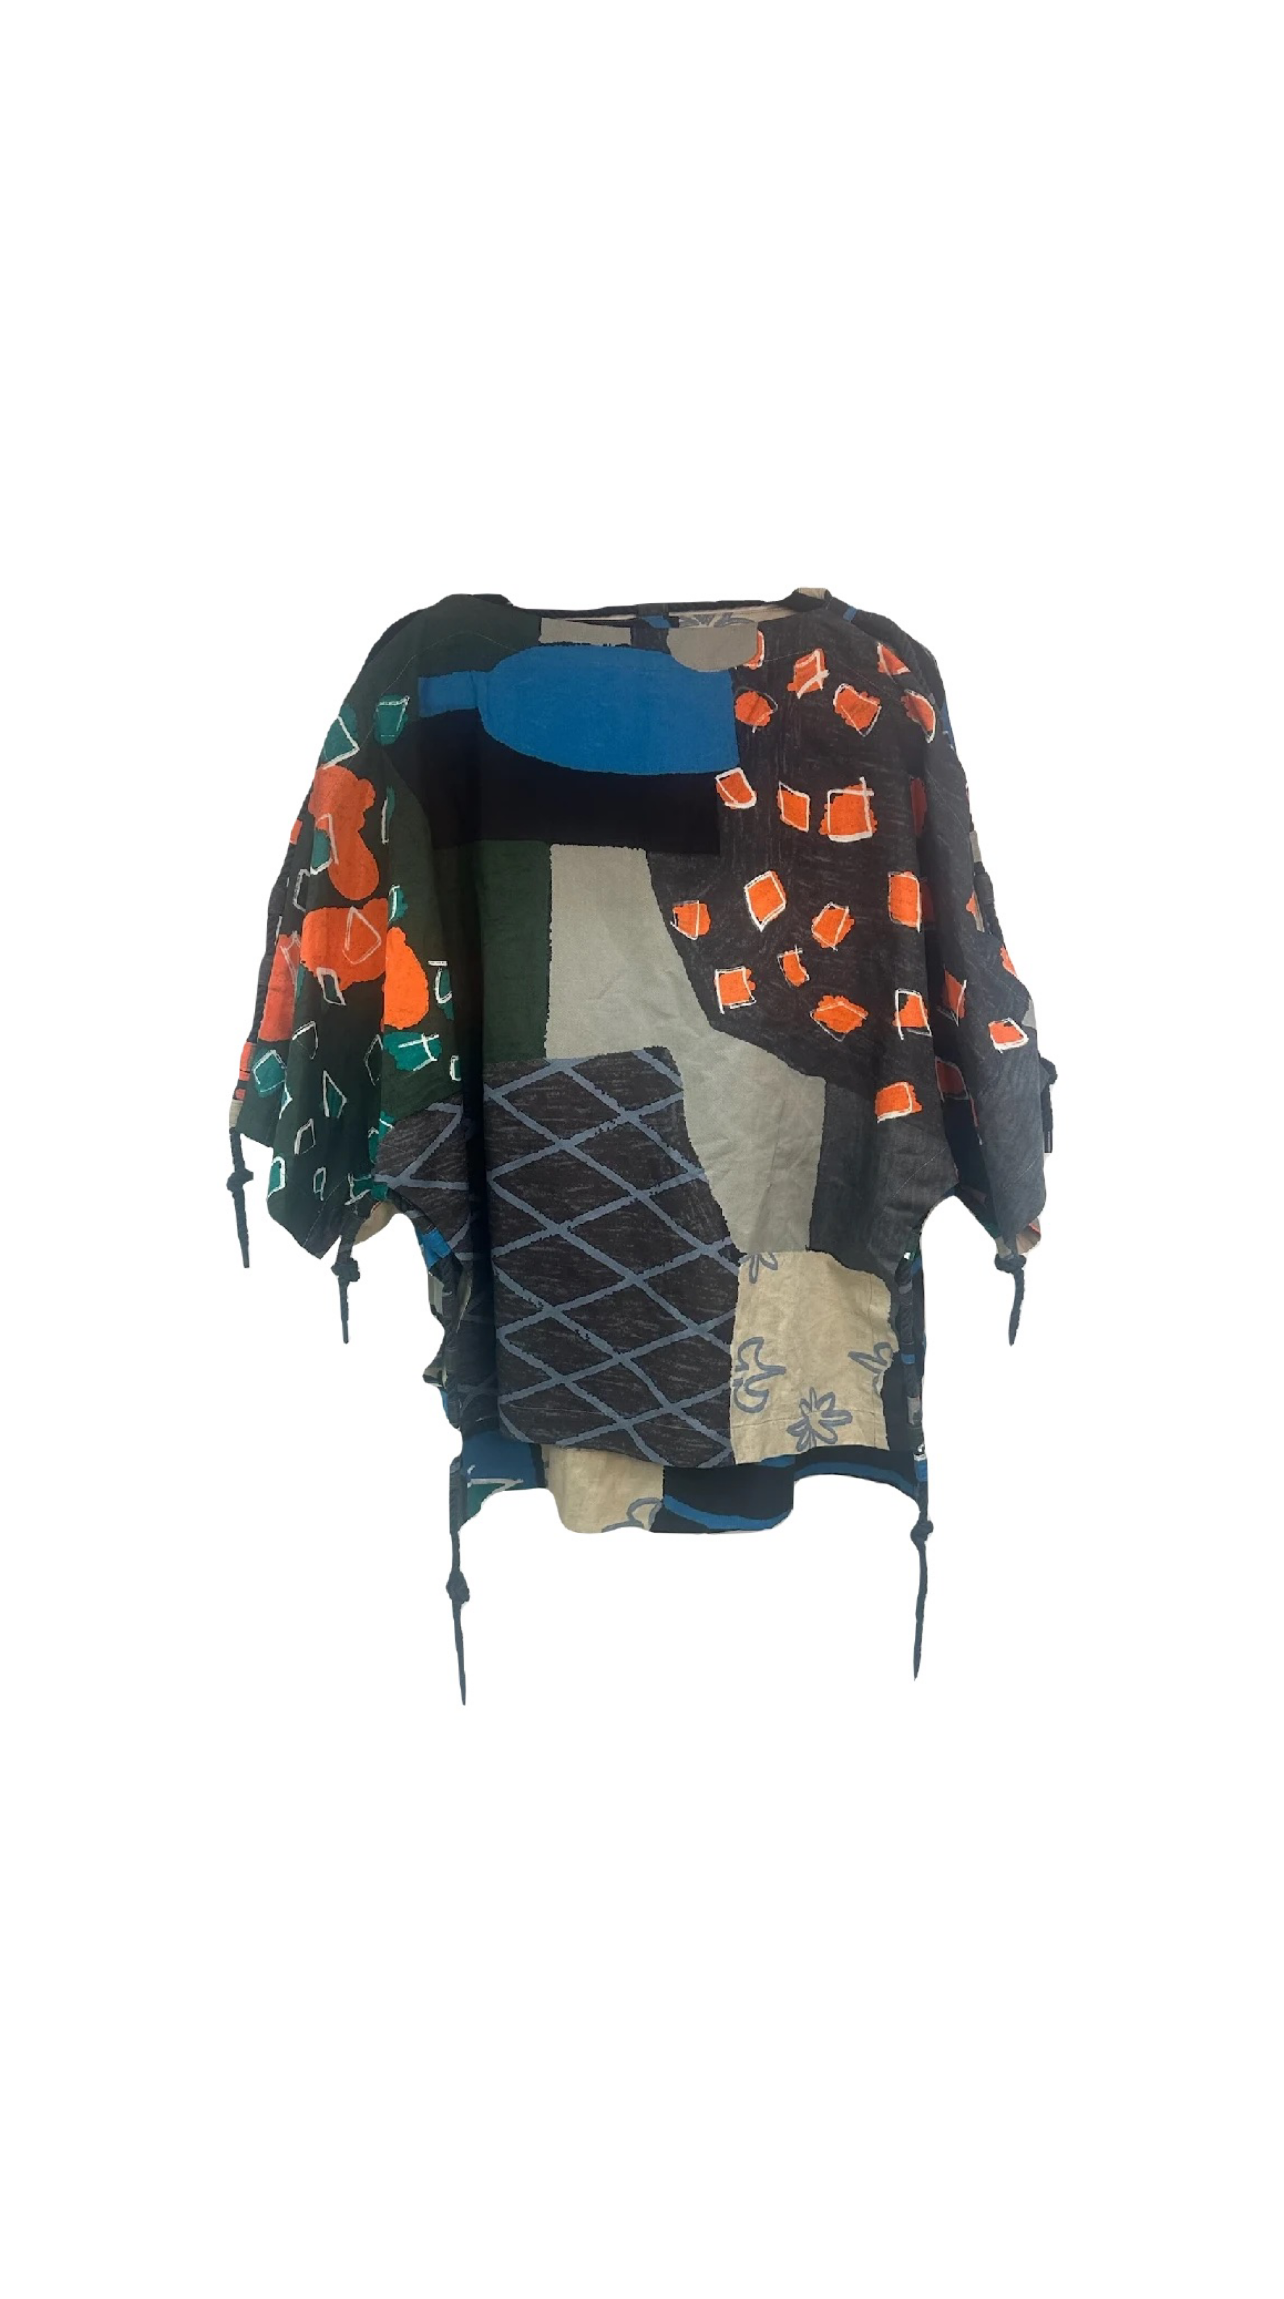 ISSEY MIYAKE S/S '21 Collection Temporary Room Printed Top